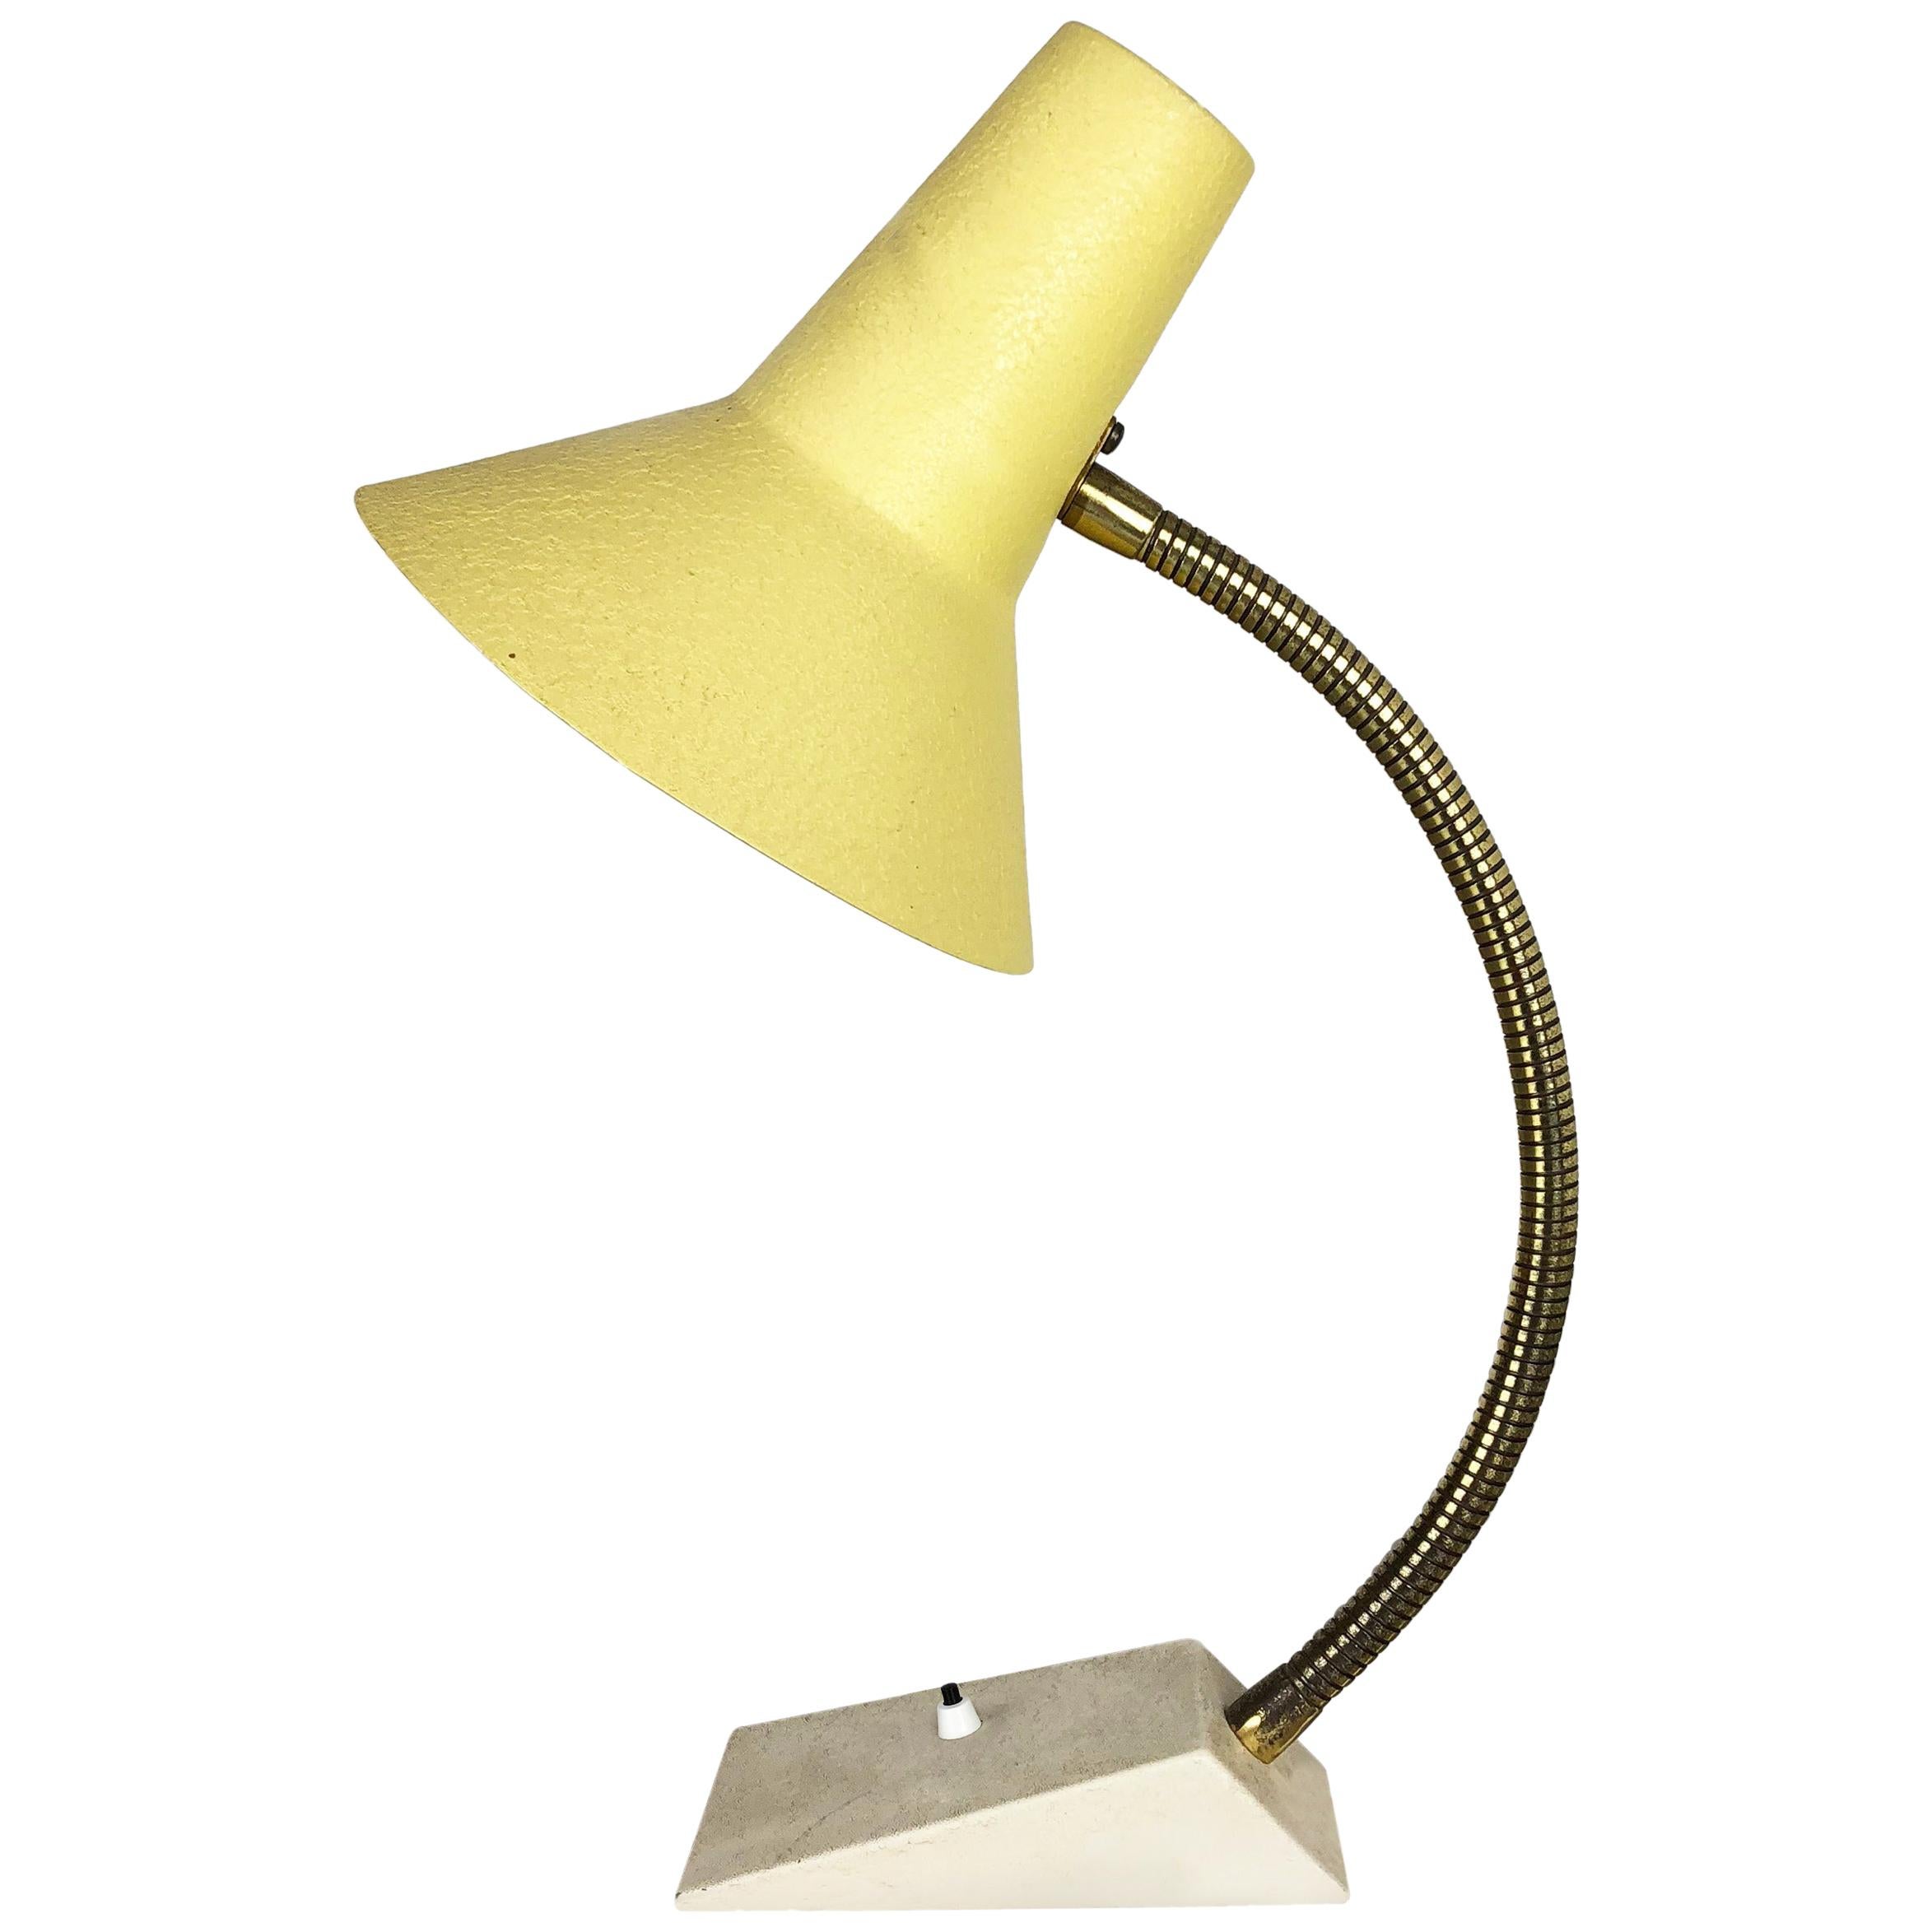 Original Modernist 1960s Brass Metal Table Light Made by SIS Lights, Germany For Sale